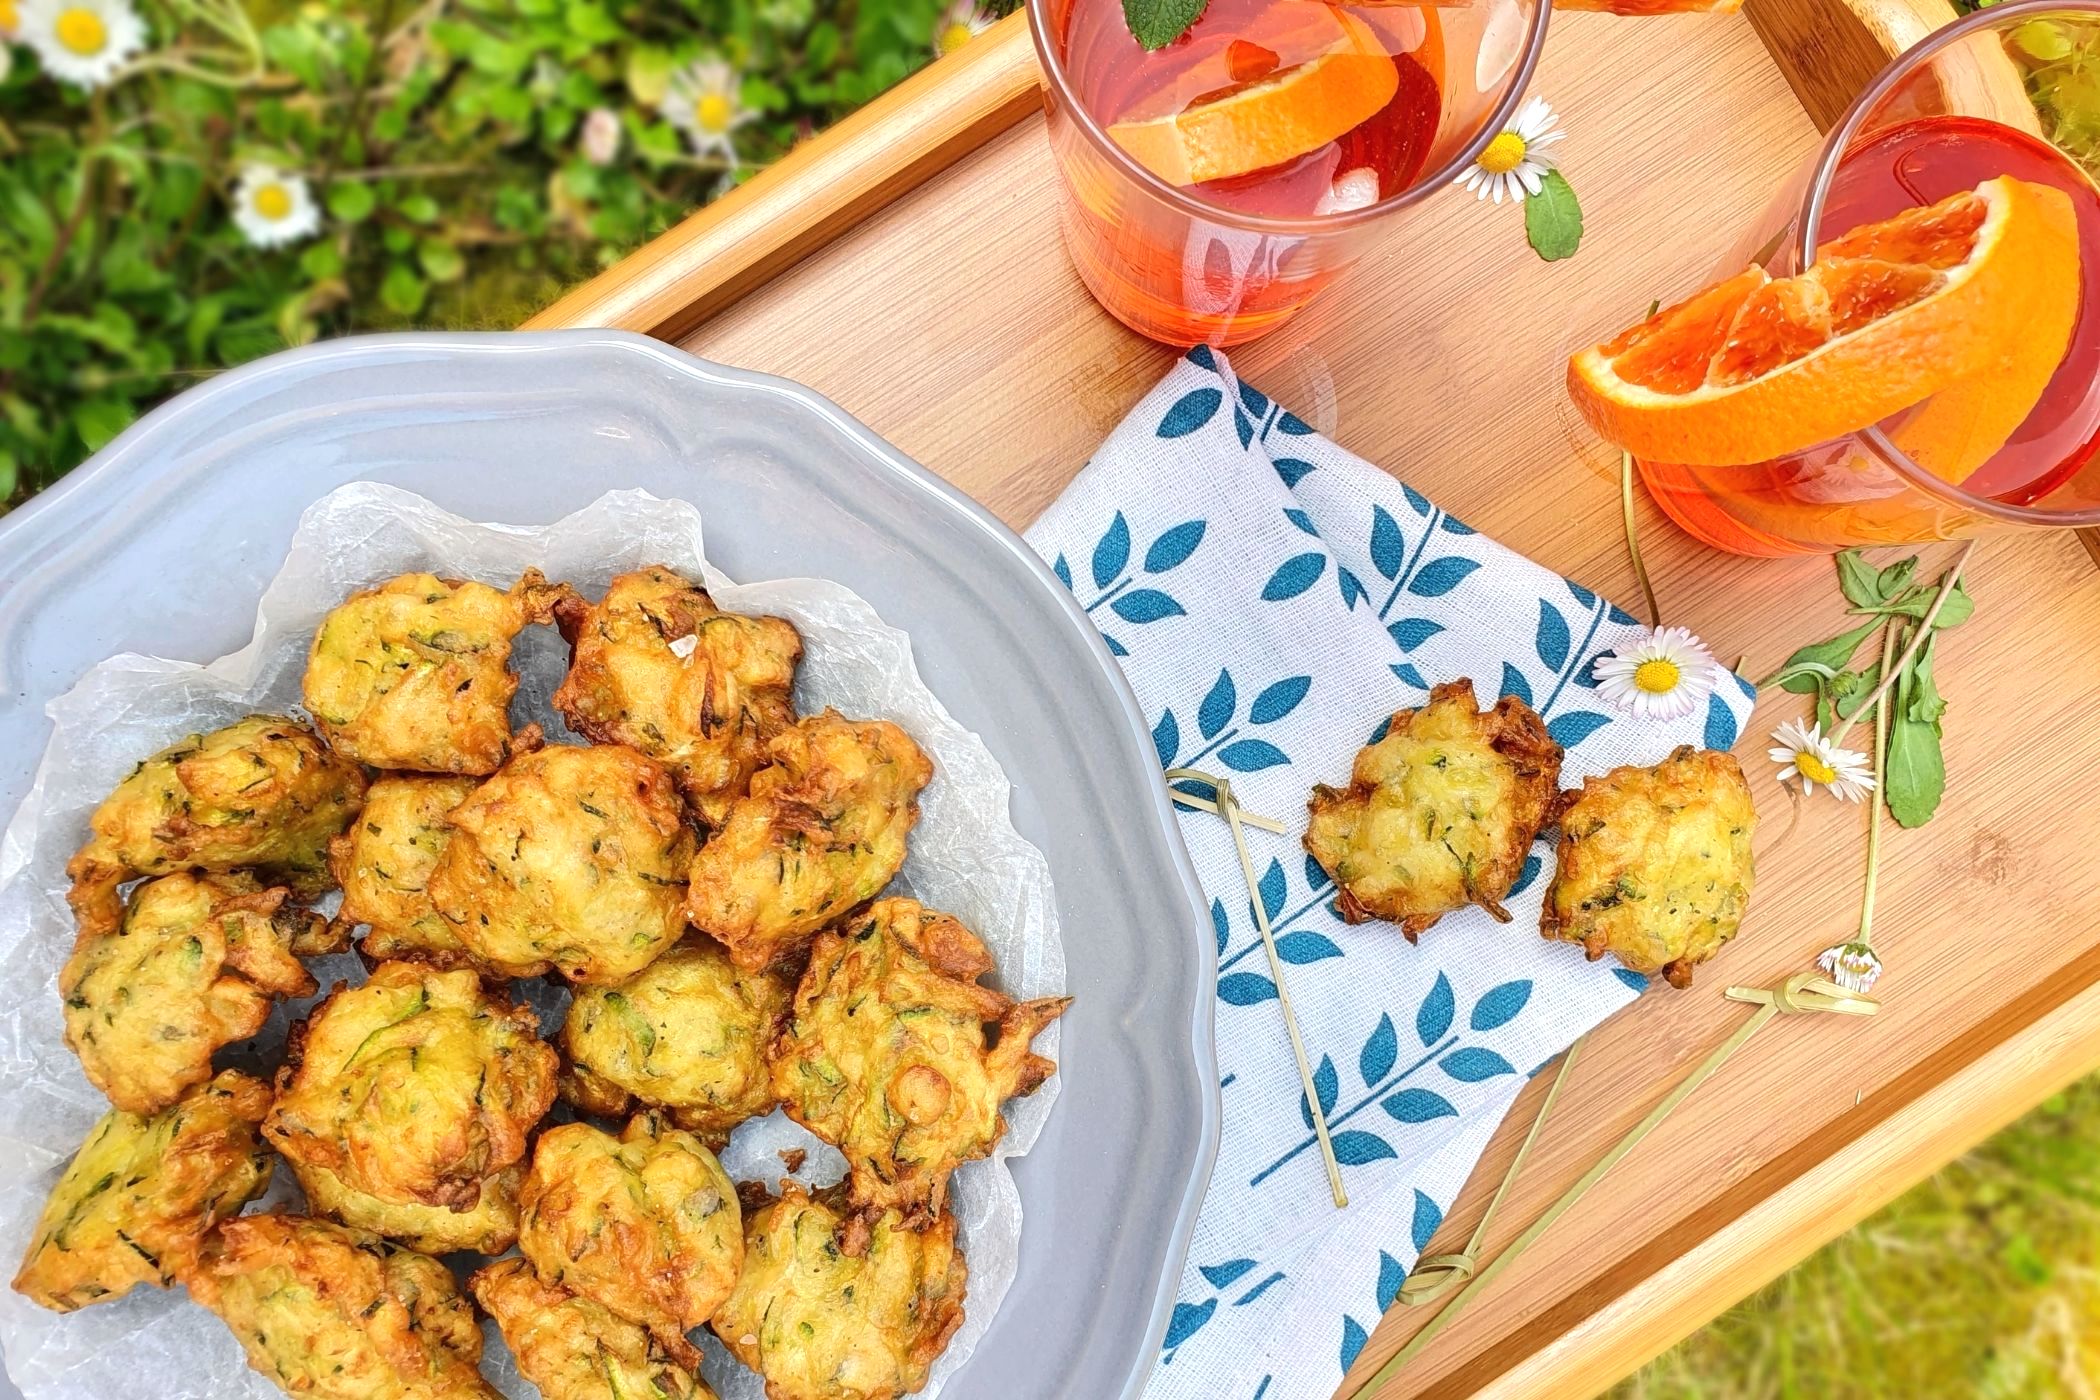 https://www.moltofood.it/wp-content/uploads/2022/04/frittelle-di-zucchine.jpg